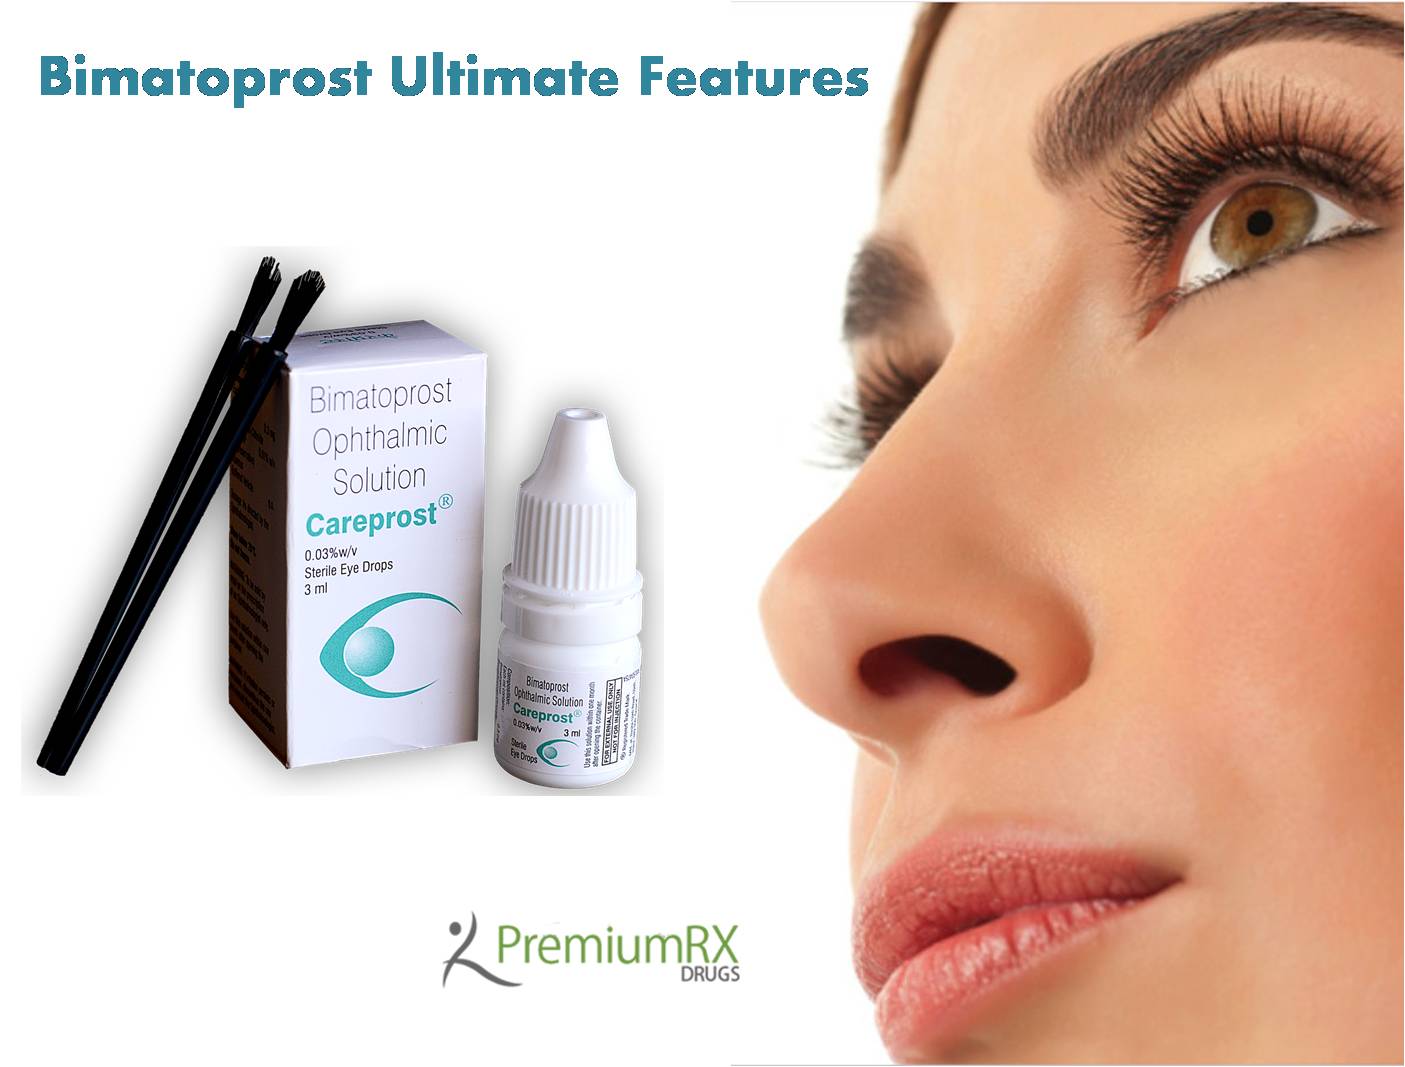 Bimatoprost Ultimate Features